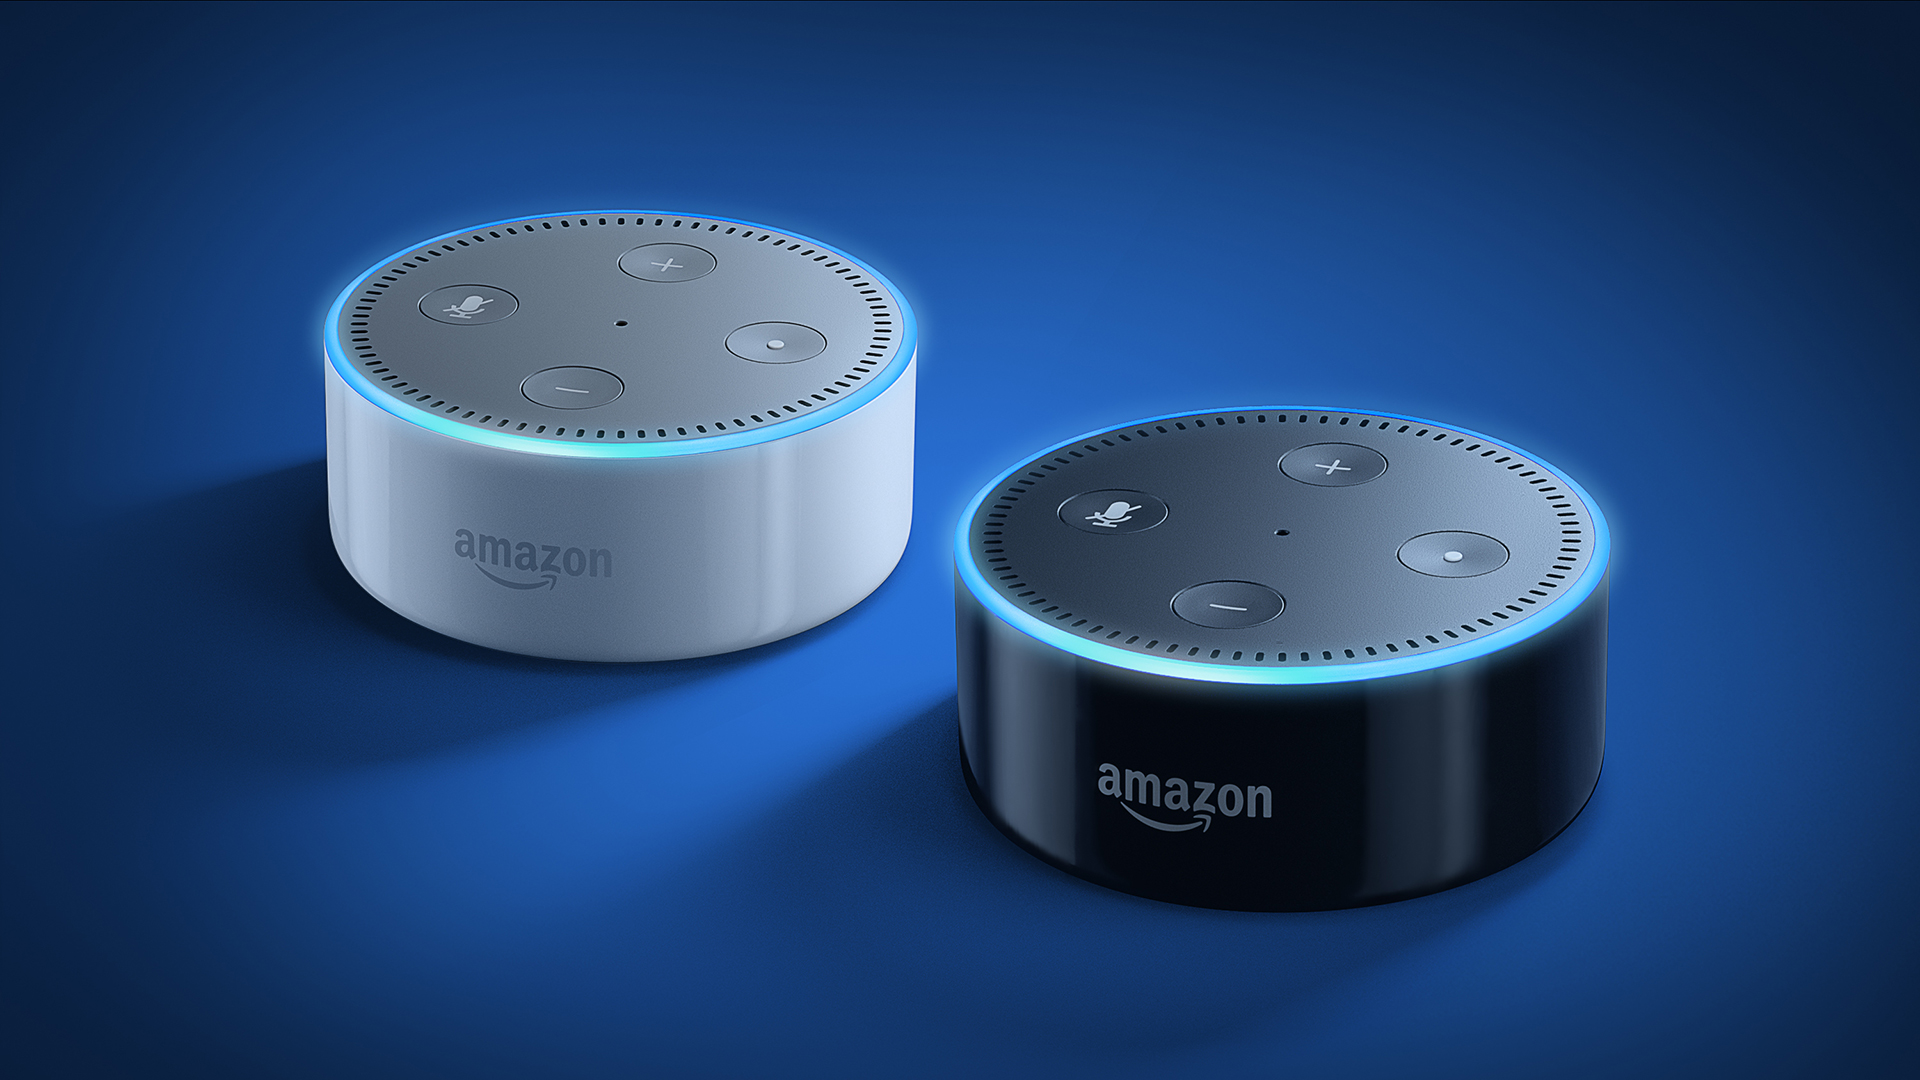 Alexa devices maintain 70% market share in U.S. according to survey